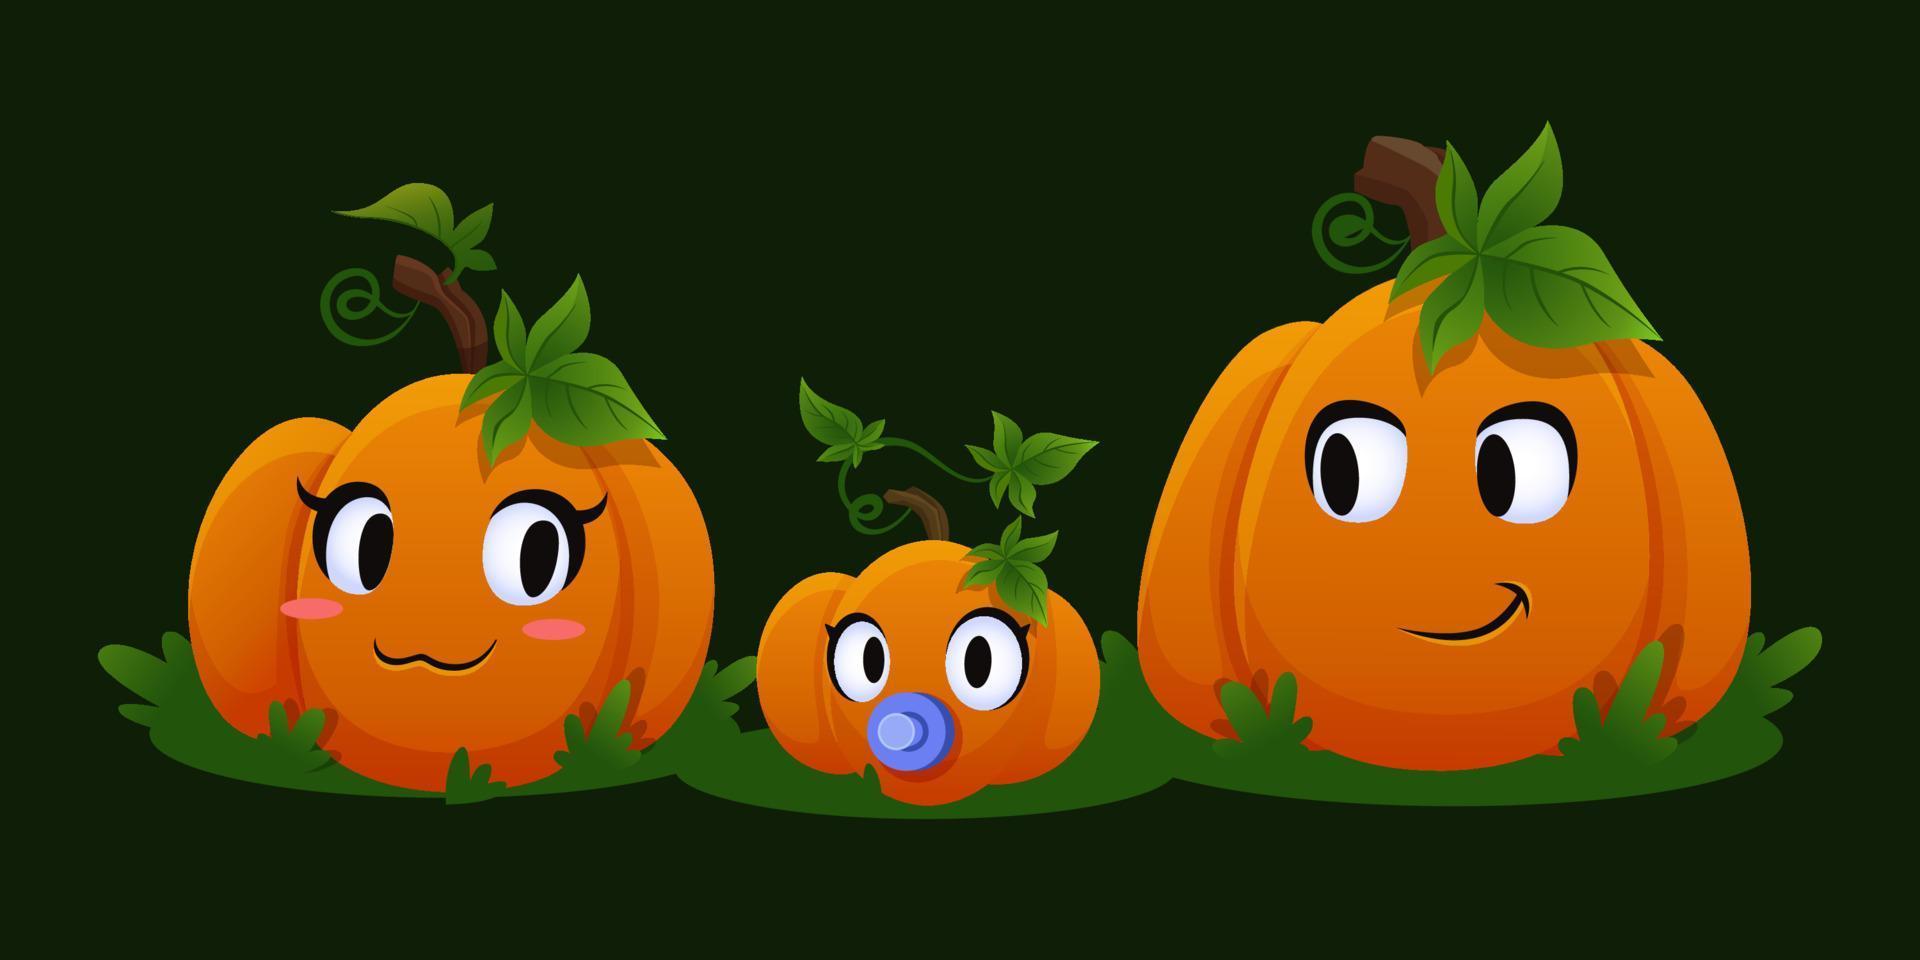 Pupmkin family. Cute orange cartoon autumn vector vegetable for print, marketing and packaging. Mom, dad and baby